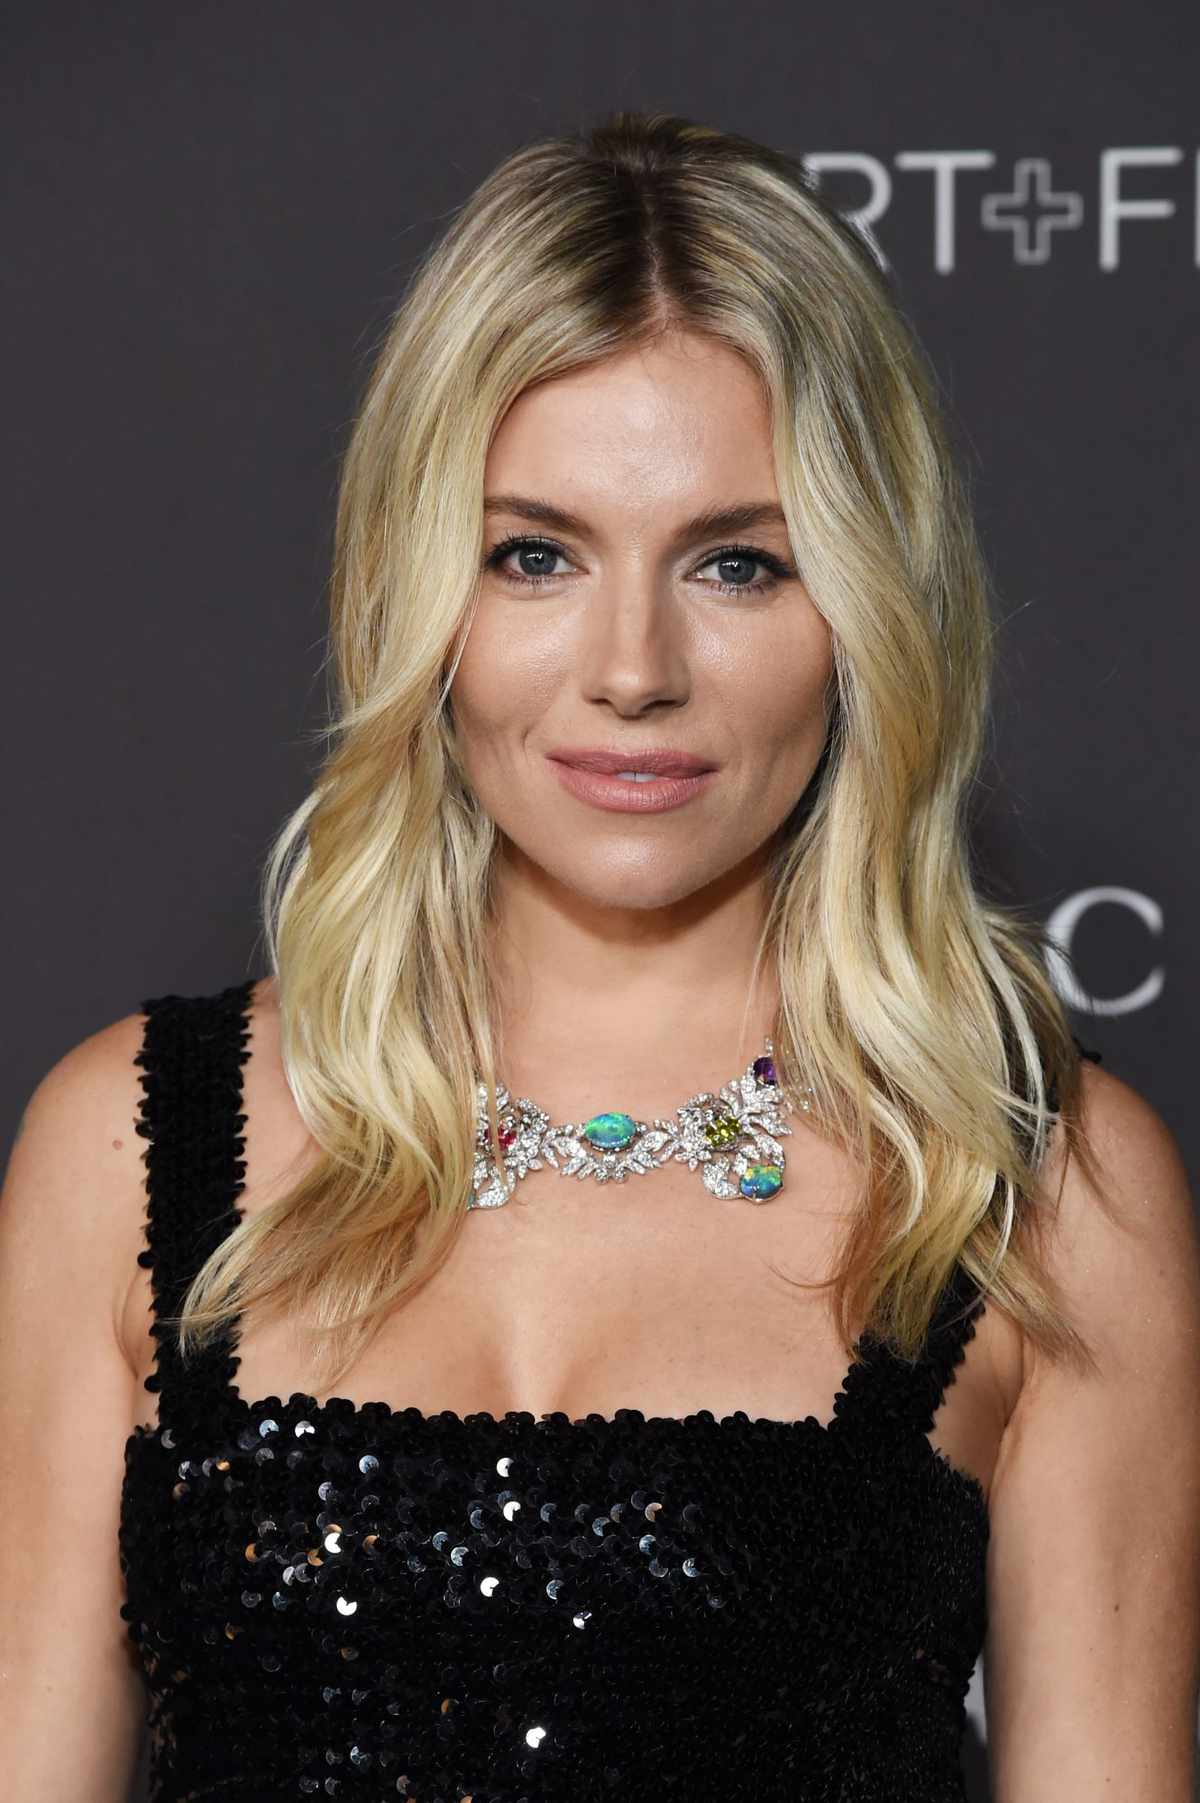 Sienna Miller at the 2019 LACMA Art + Film Gala Presented By Gucci